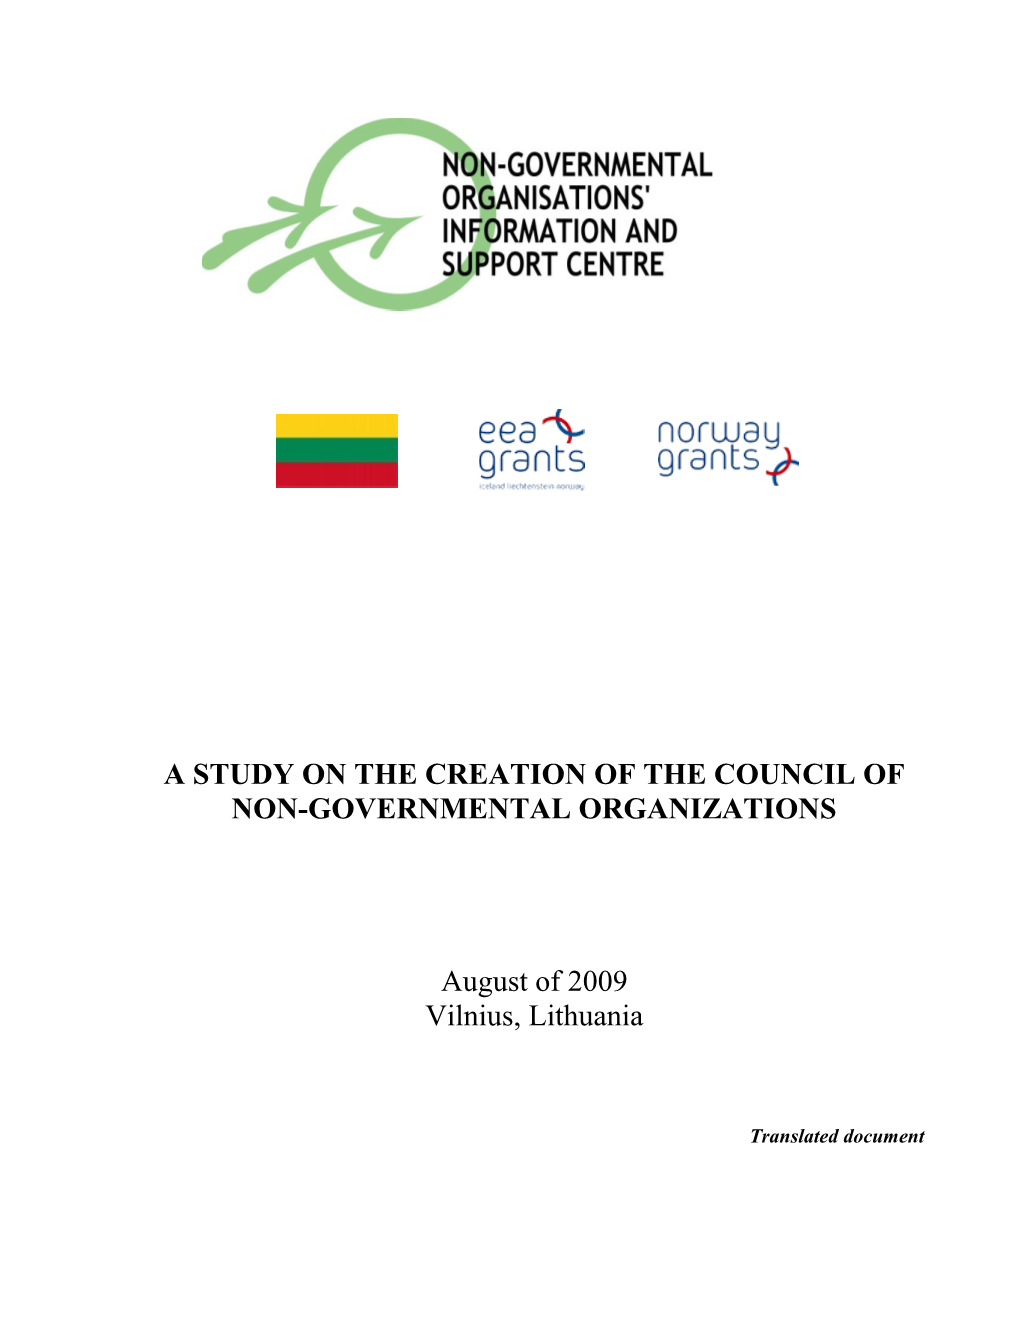 A Study on the Creation of the Council of Non-Governmental Organizations